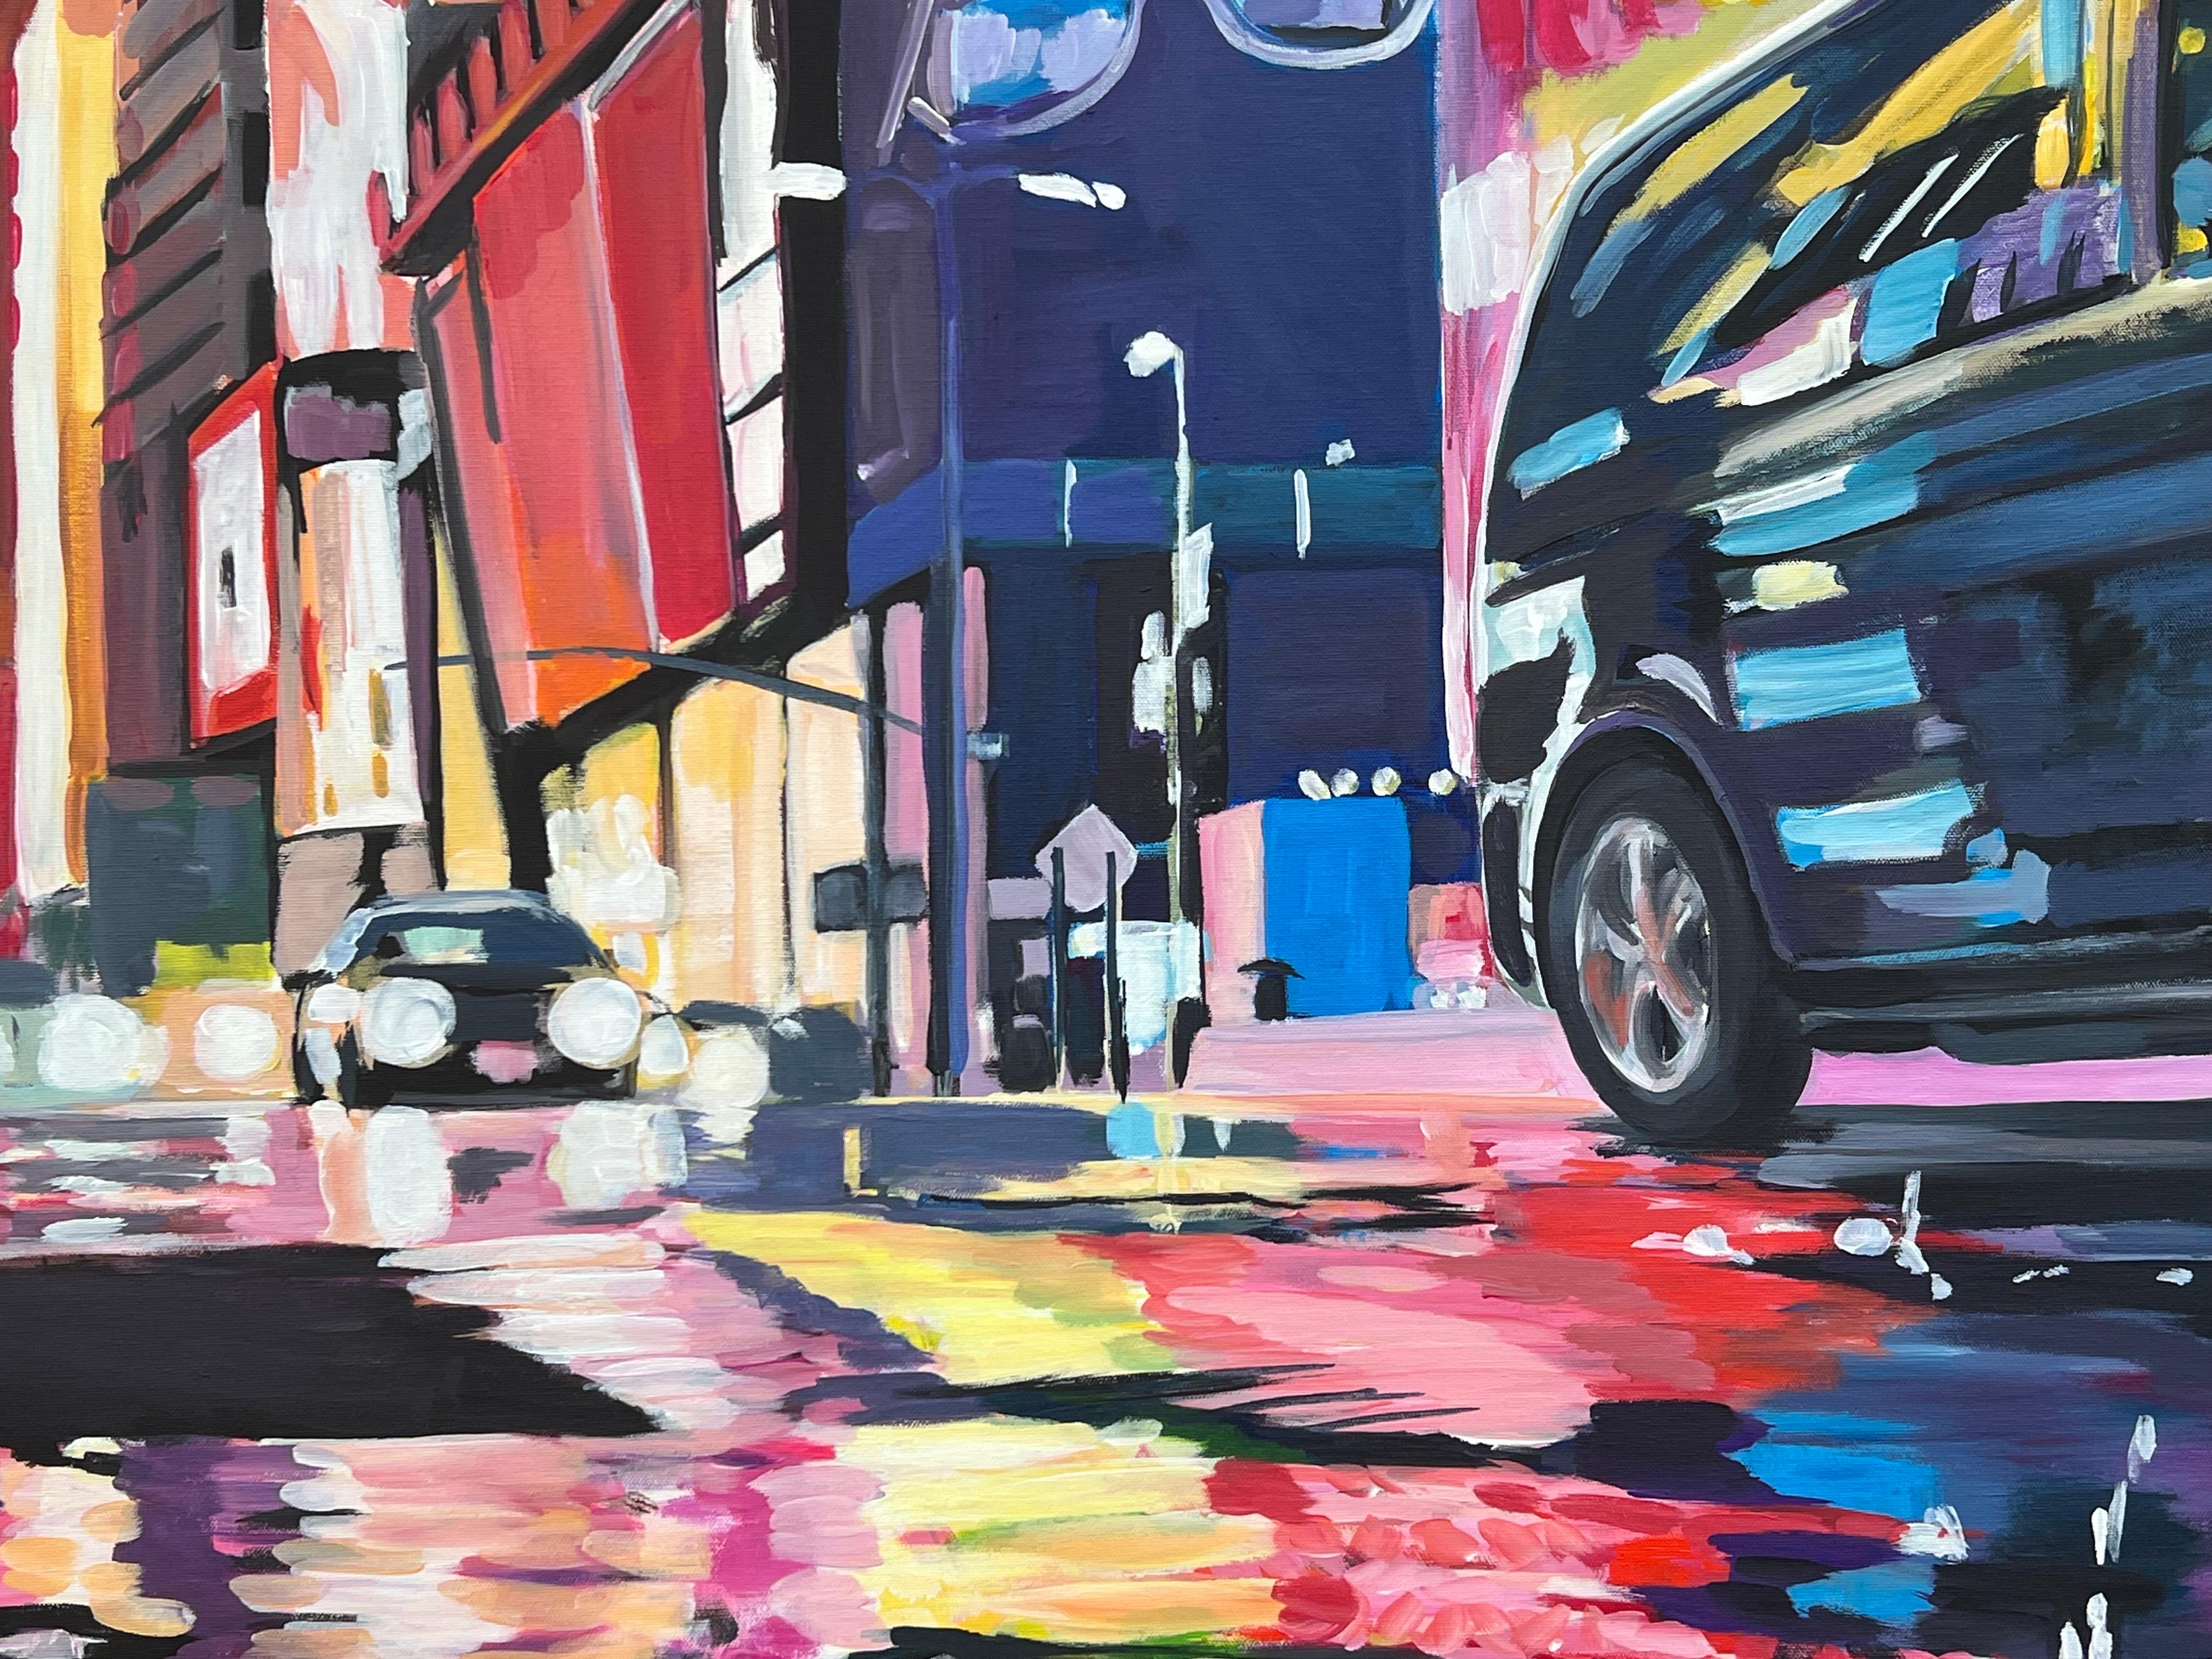 Neon Reflections in the New York City Rain by Contemporary British Urban Artist For Sale 2